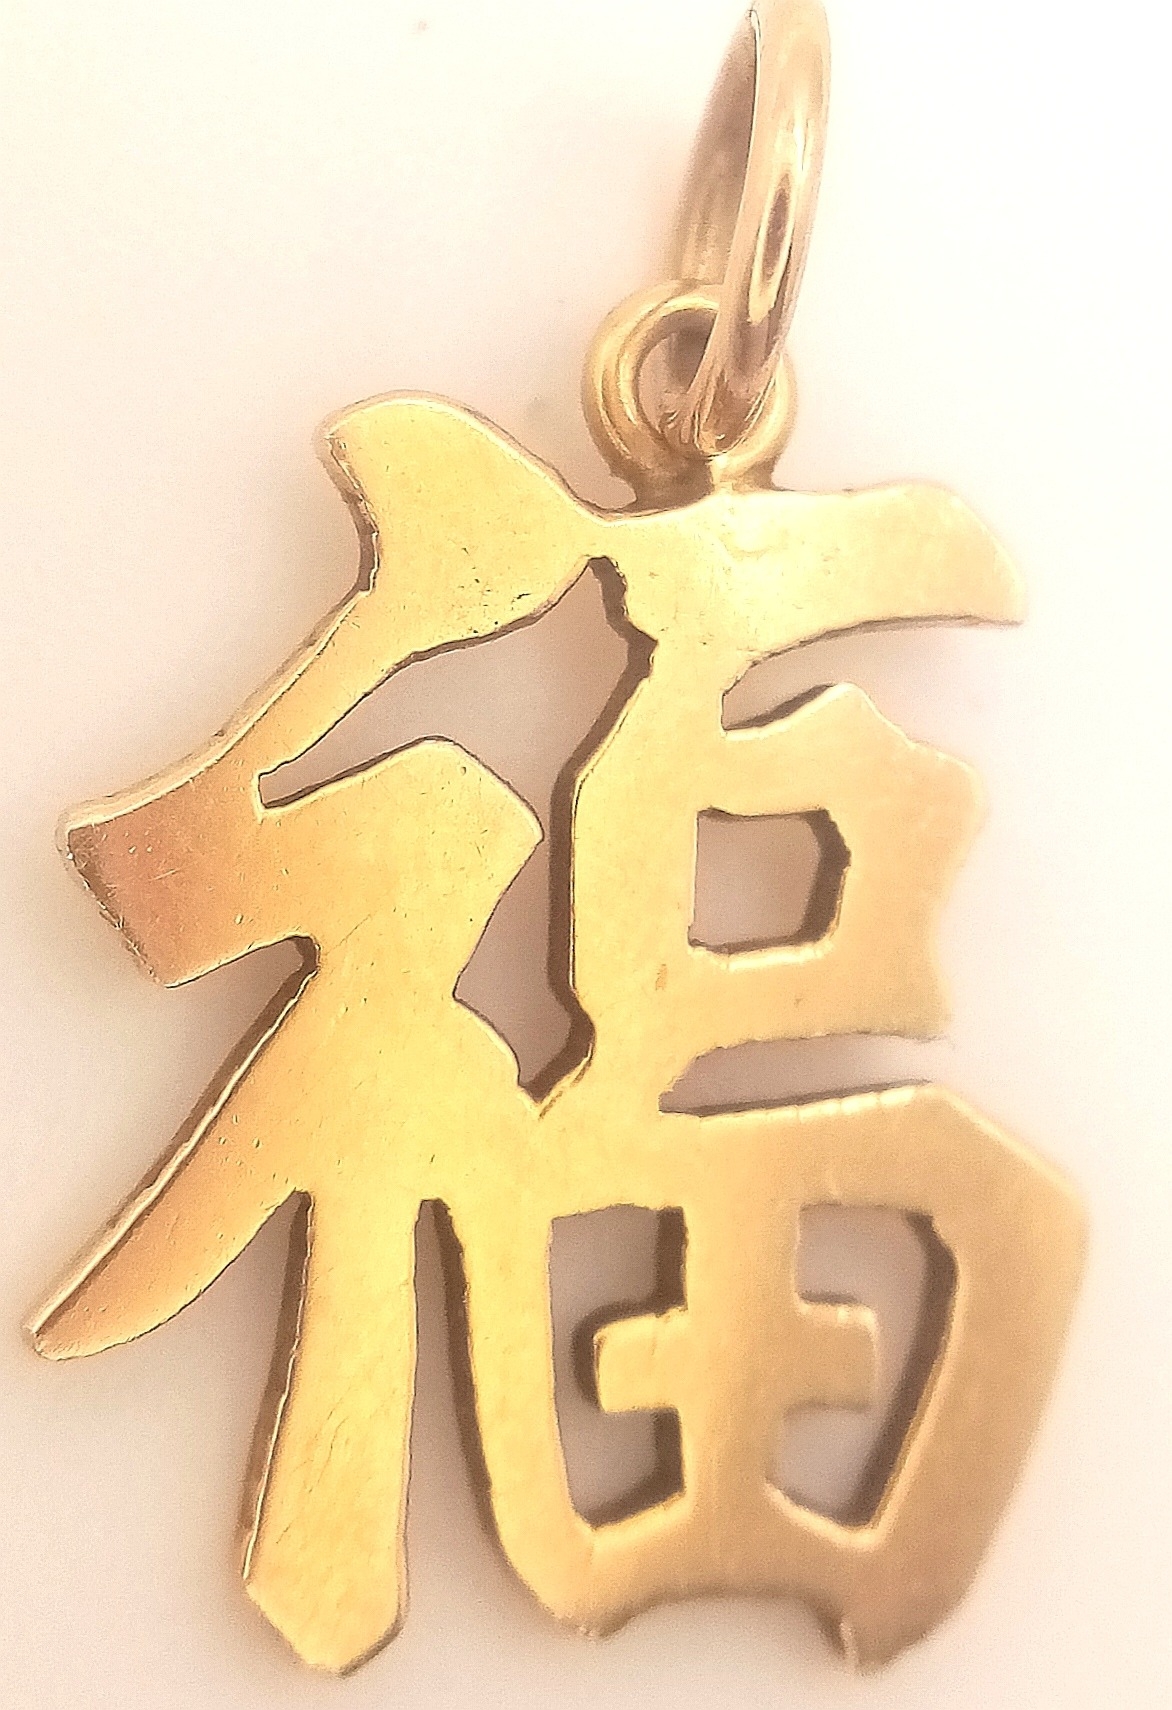 A 14K YELLOW GOLD CHINESE GOOD LUCK/HAPPINESS CHARM/PENDANT. 2.2cm, 1.7g total weight. Ref: SC 8058 - Image 2 of 6